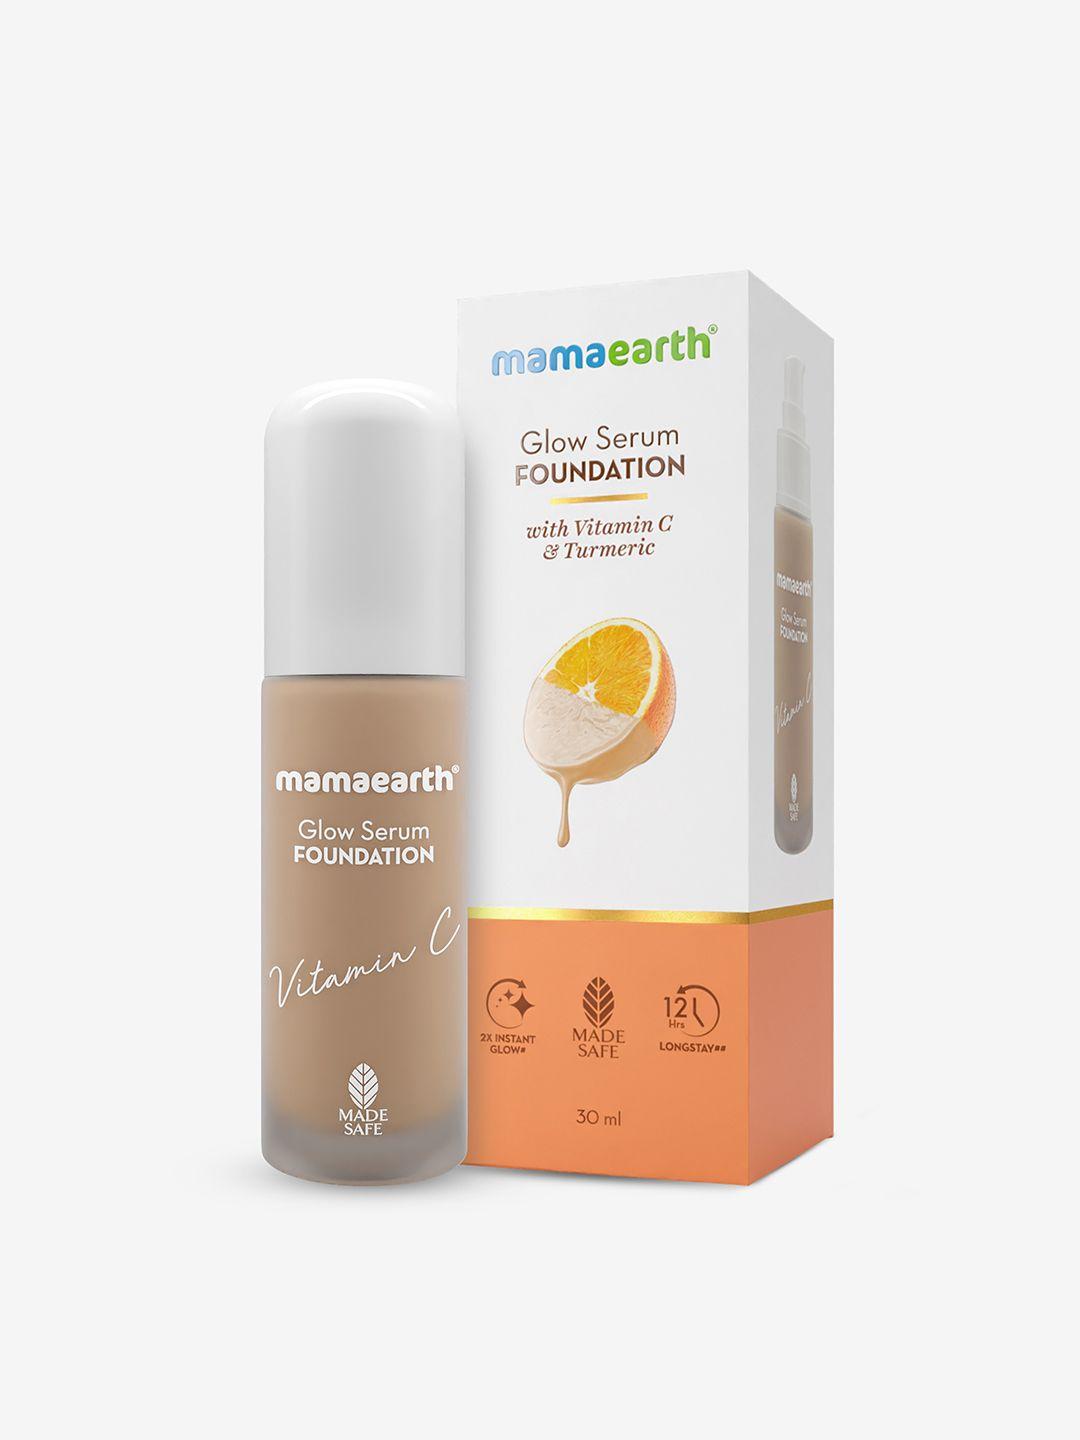 mamaearth glow serum 12 hour long stay foundation with turmeric 30 ml - natural glow 08